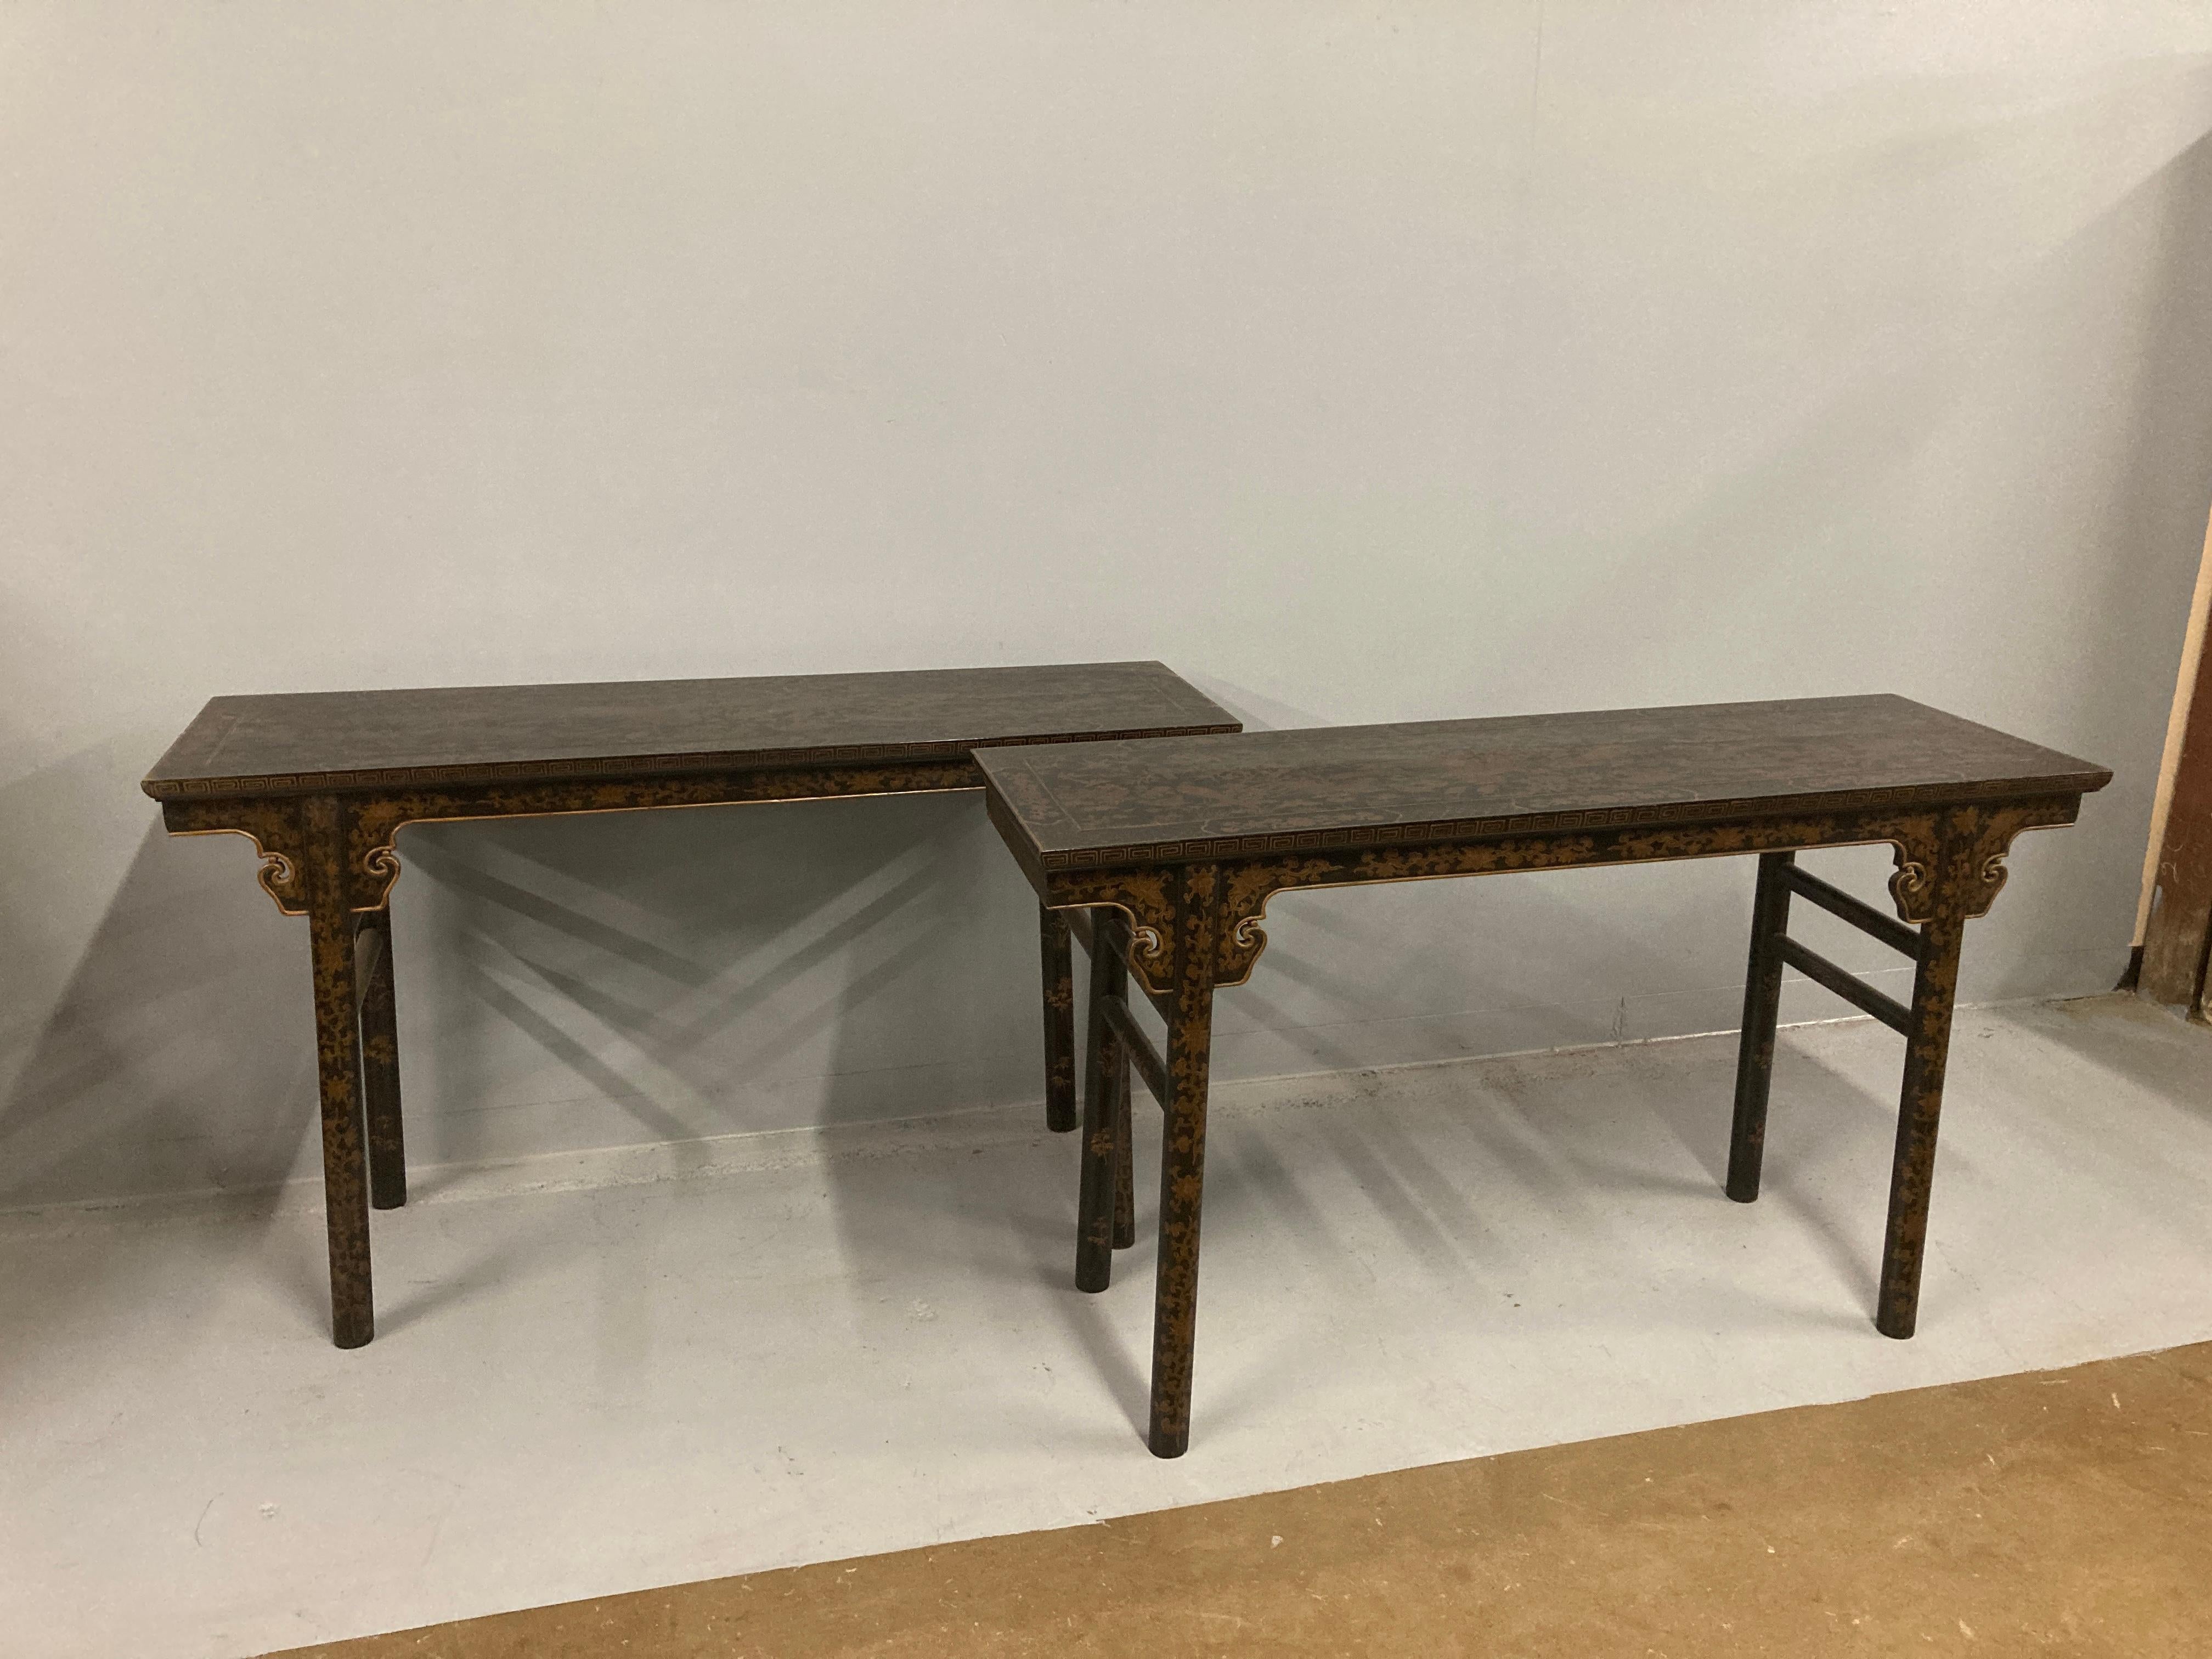 A pair of Chinese Qing style black lacquer console tables with gilded decoration depicting birds and foliage.
These tables are good examples of Qing Dynasty style made in the 1960s.